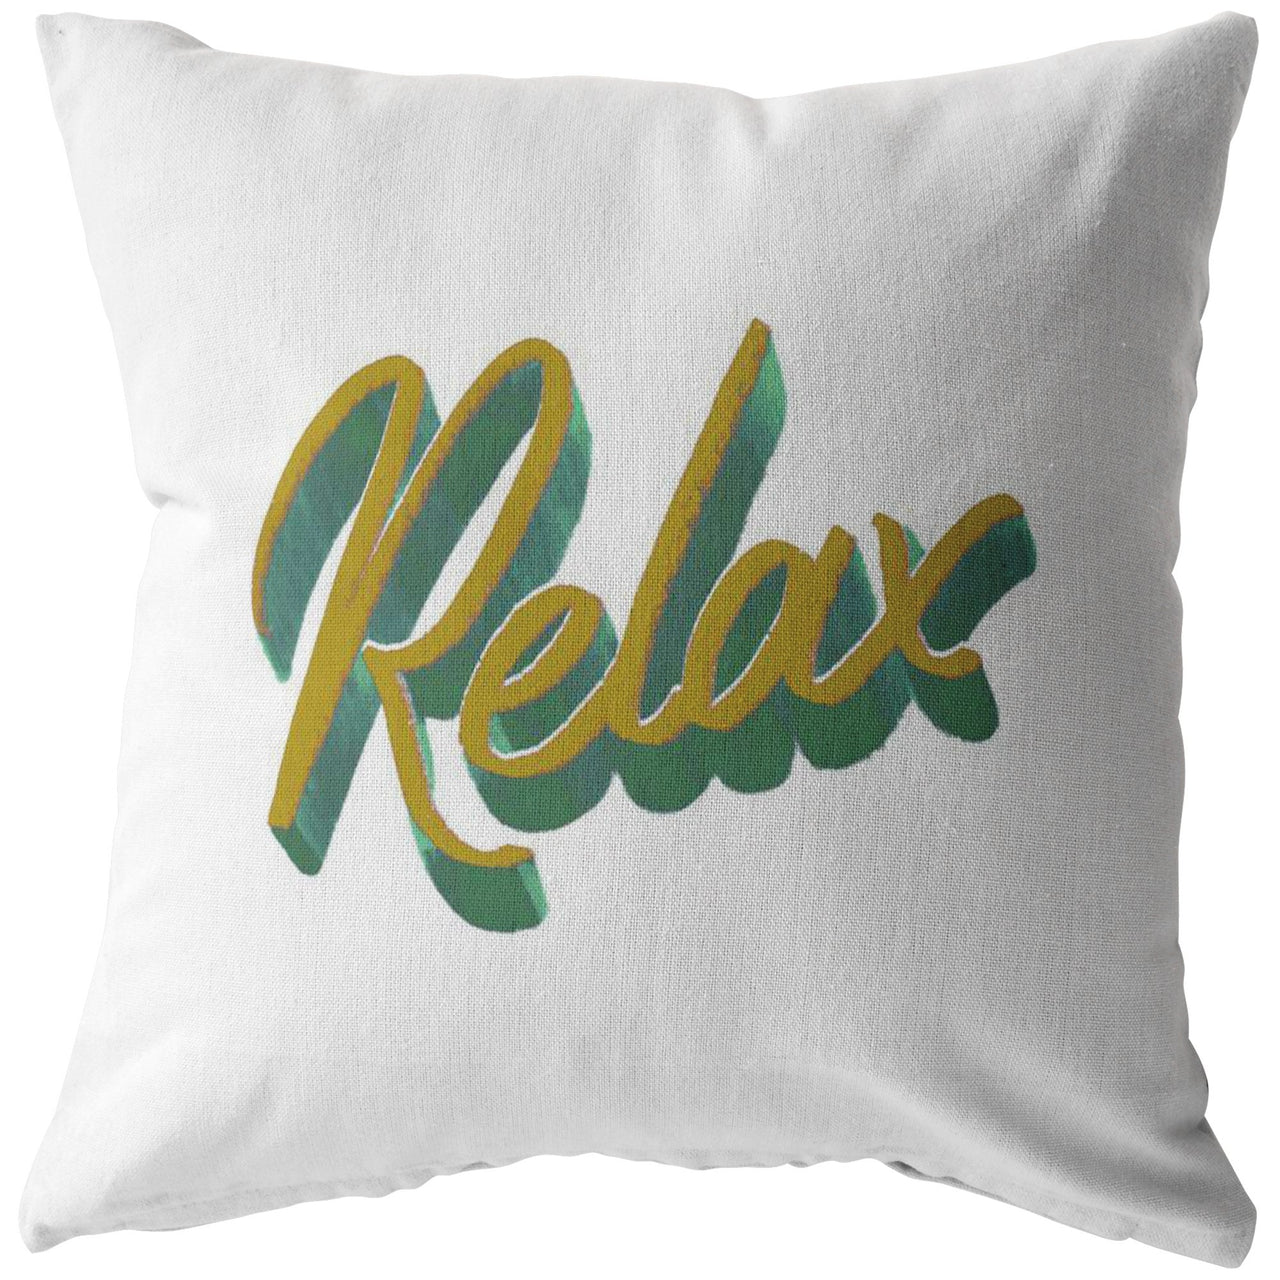 The Relax Pillow